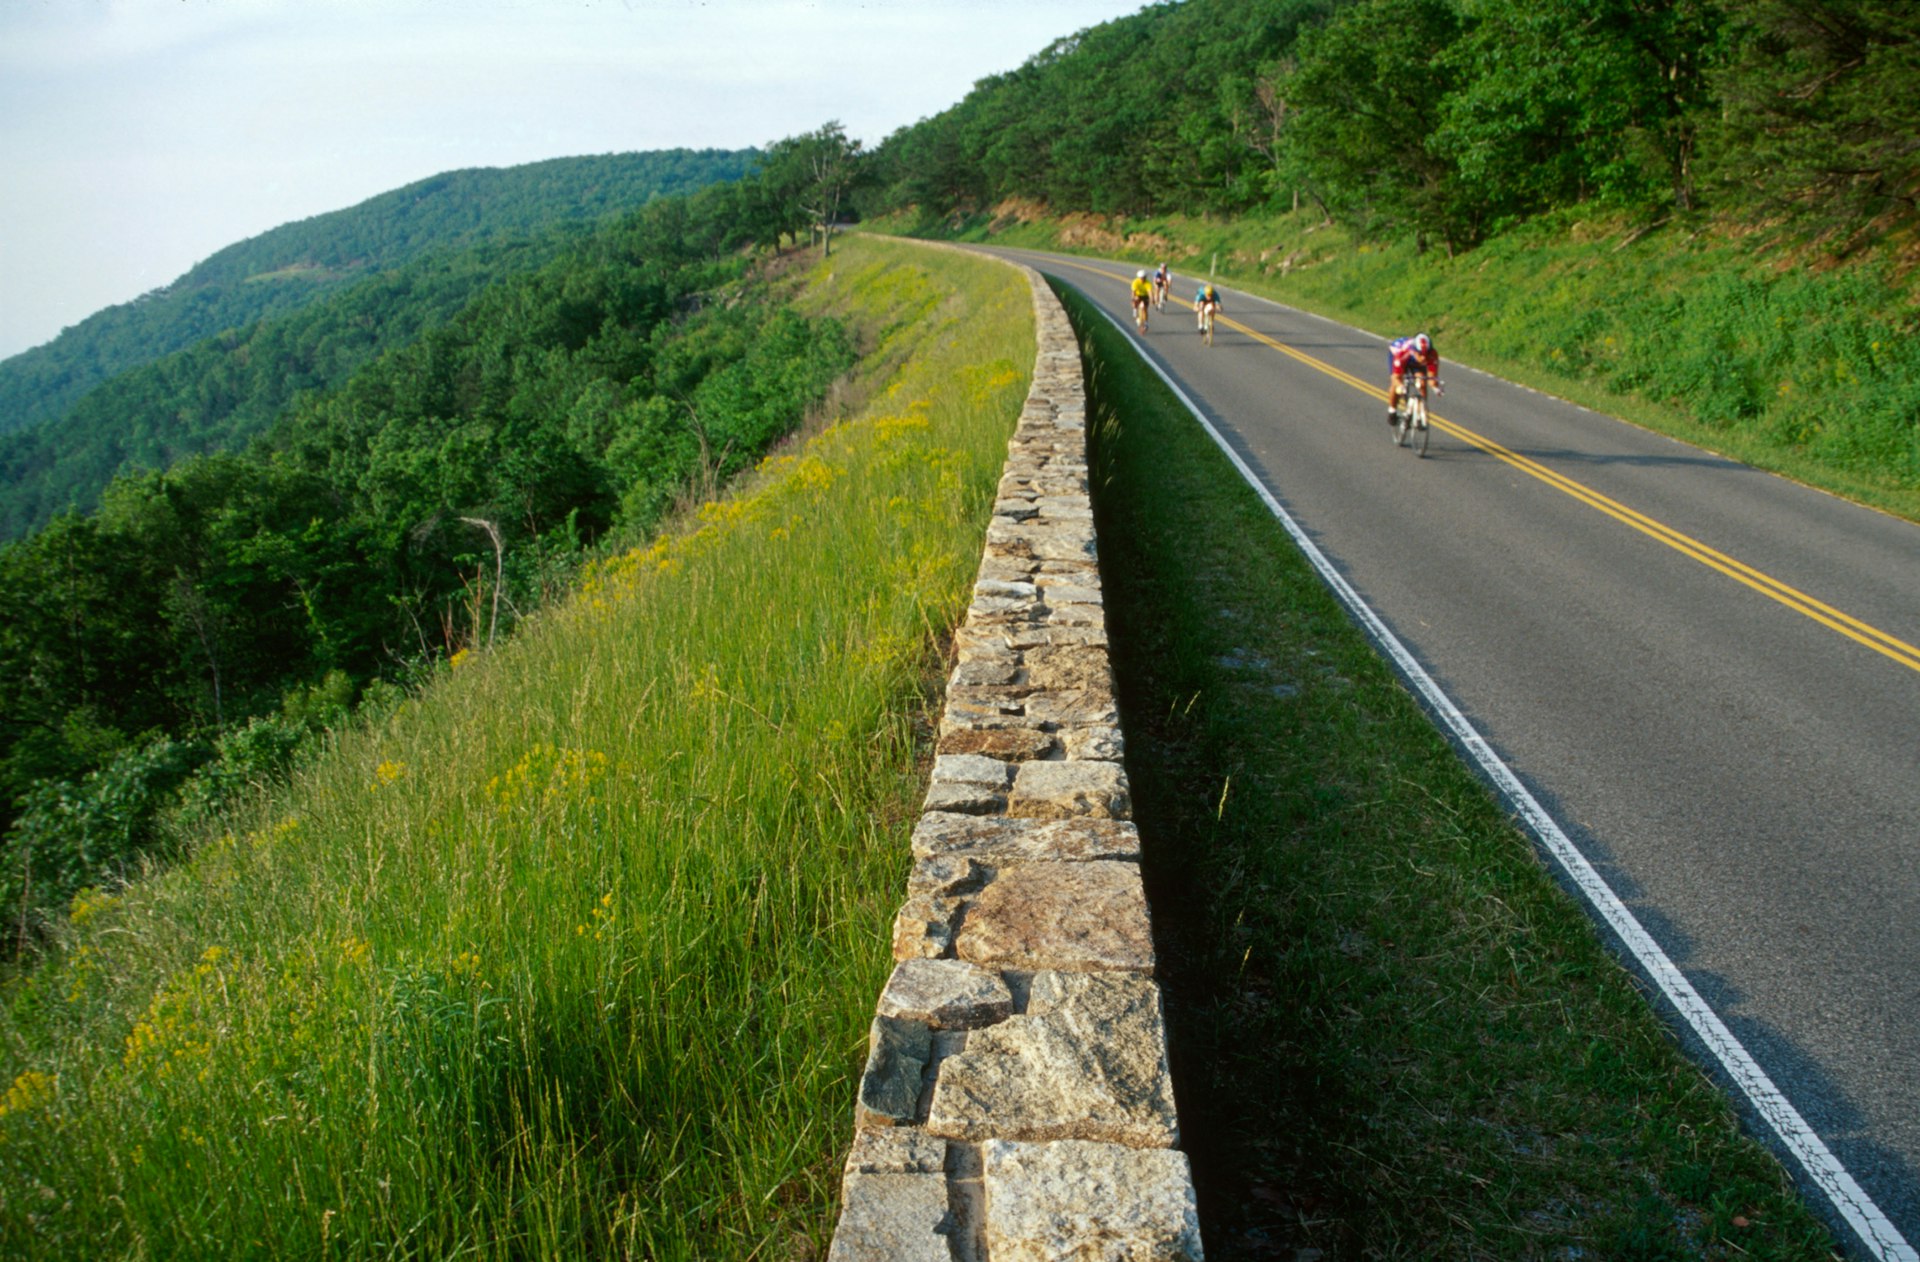 Cyclists power up a hill with hilly scenery stretching out behind them in Shenandoah National park